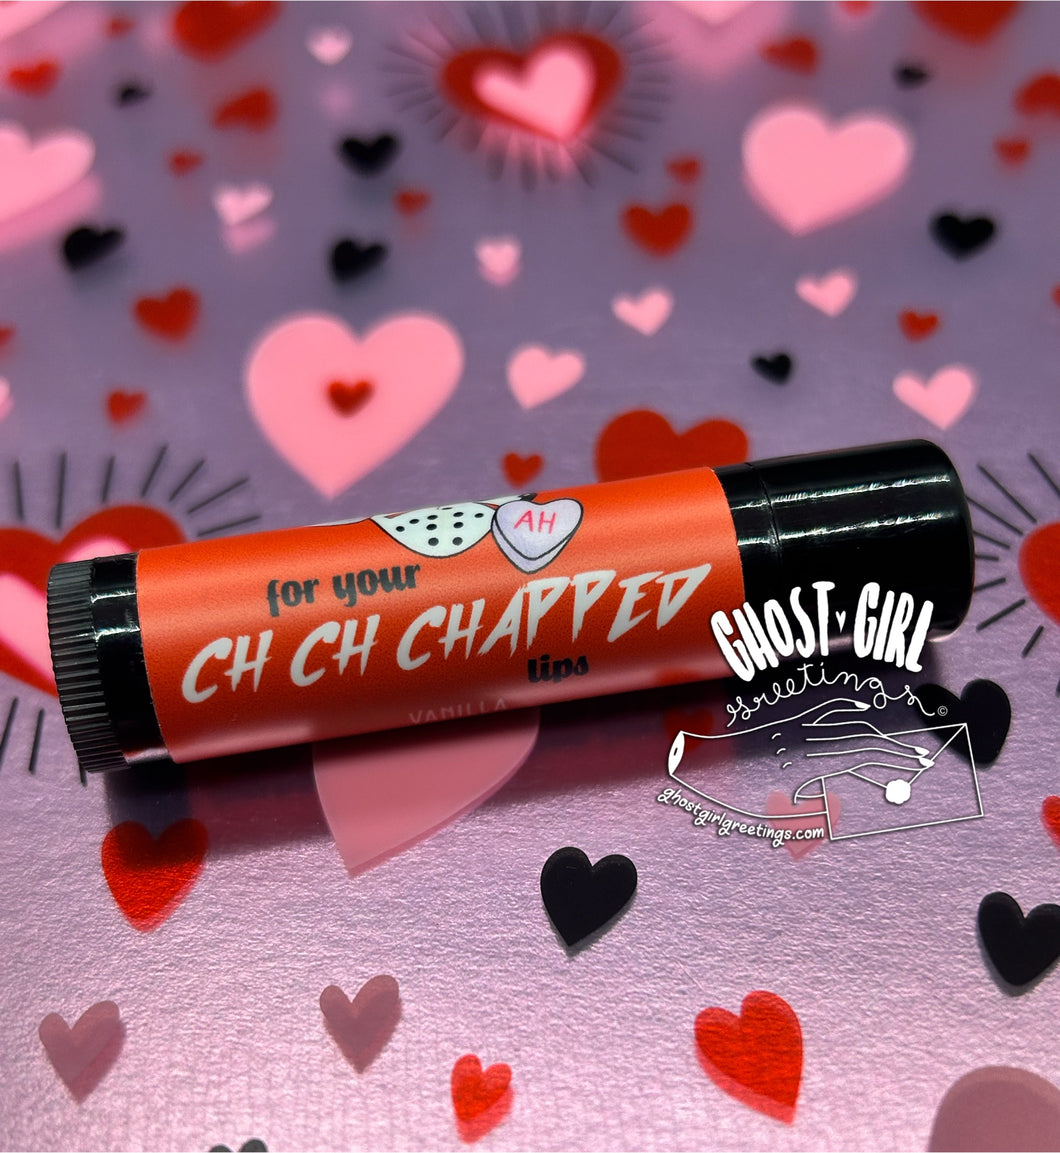 Lip Balm: For Your Ch Ch Chapped lips